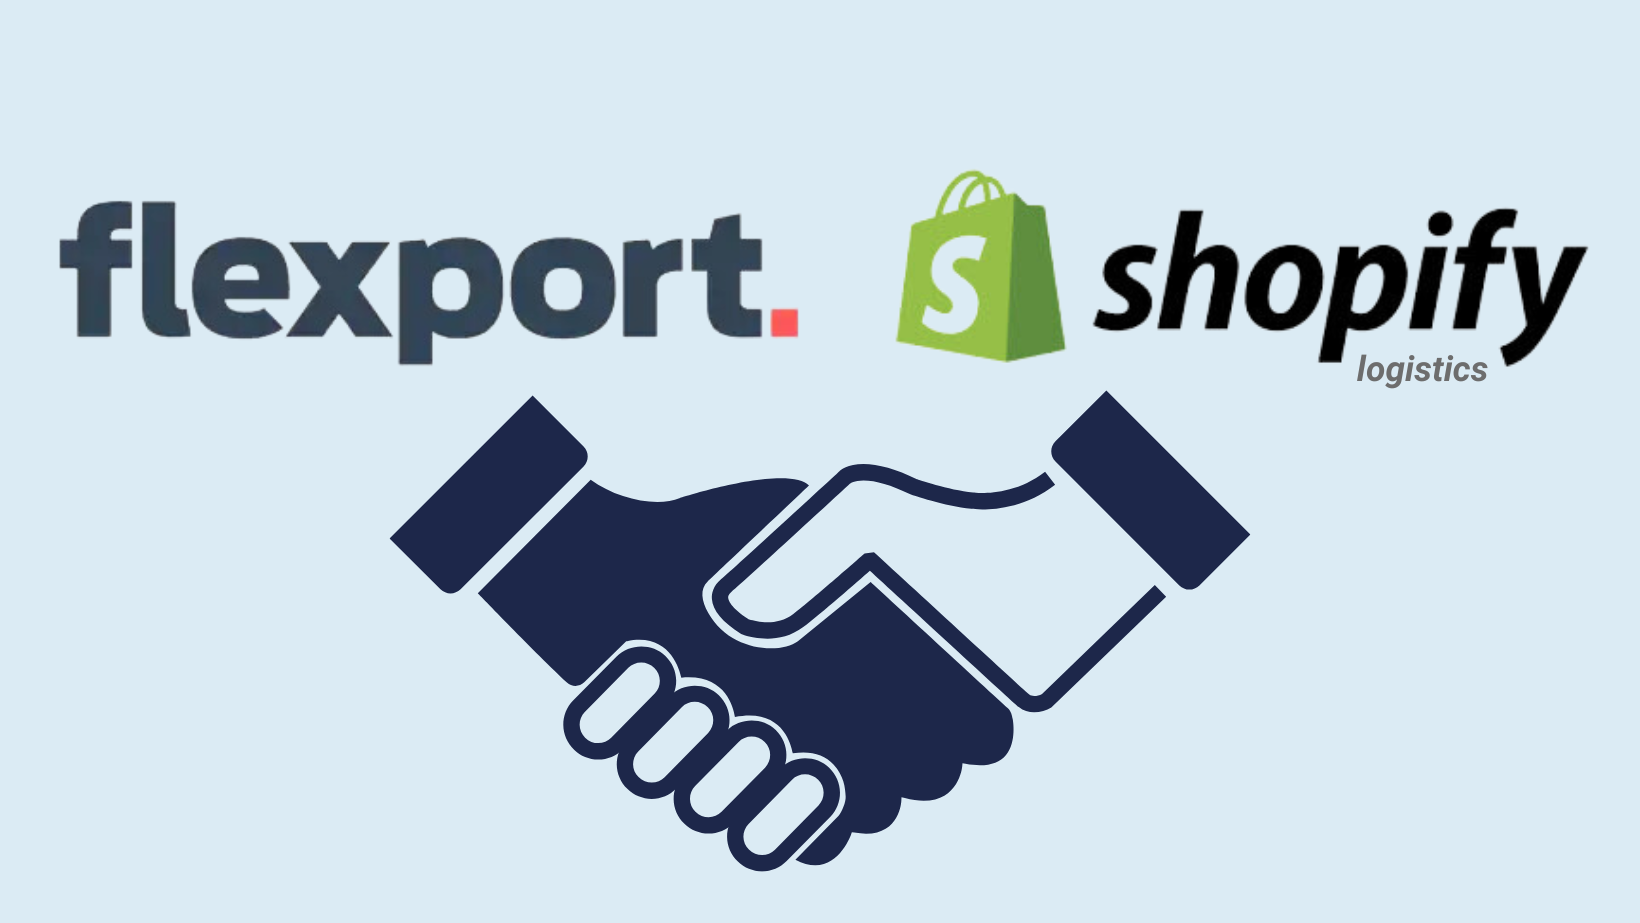 Flexport’s Purchase of Shopify Logistics and the Future of Omnichannel Fulfillment